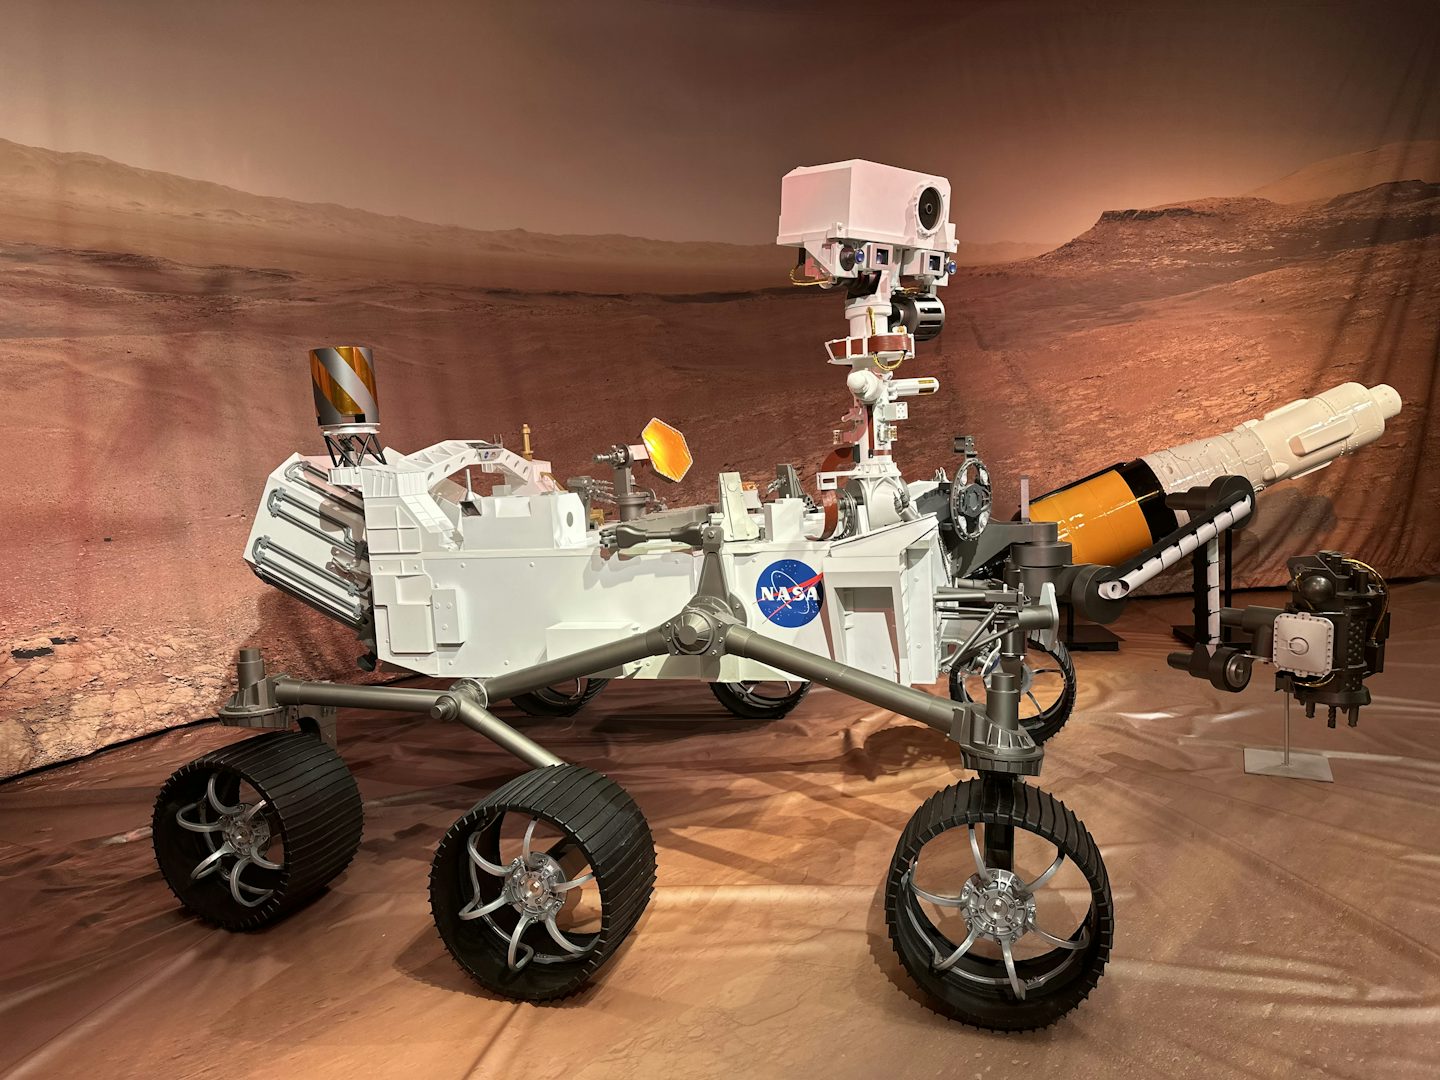 Photo of Perseverance rover on display at Perot Museum